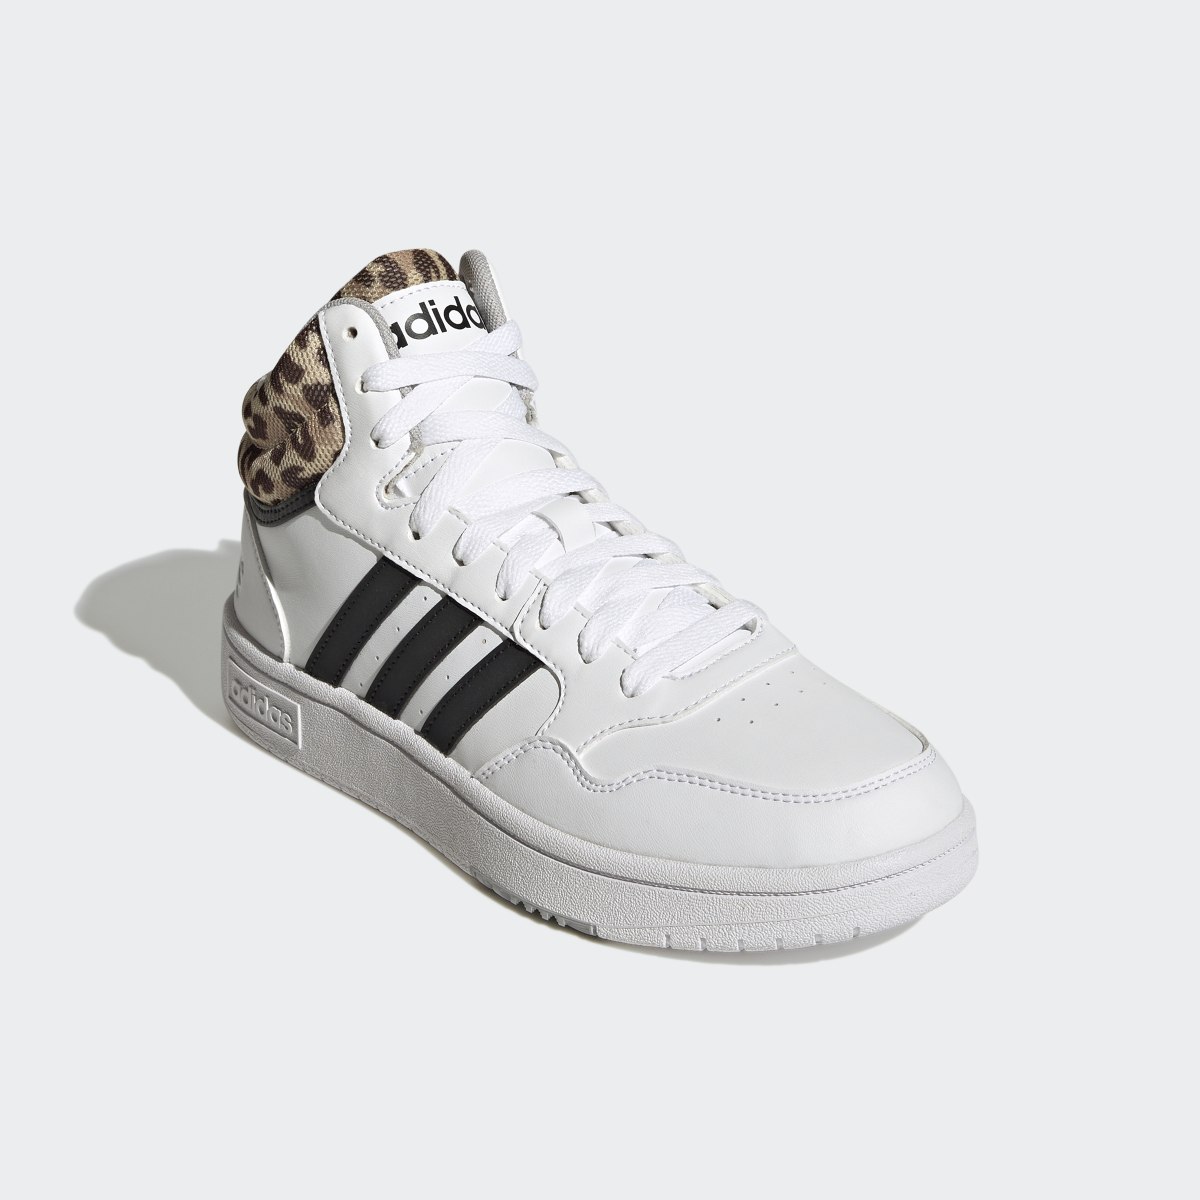 Adidas Hoops 3.0 Lifestyle Basketball Mid Classic Schuh. 5